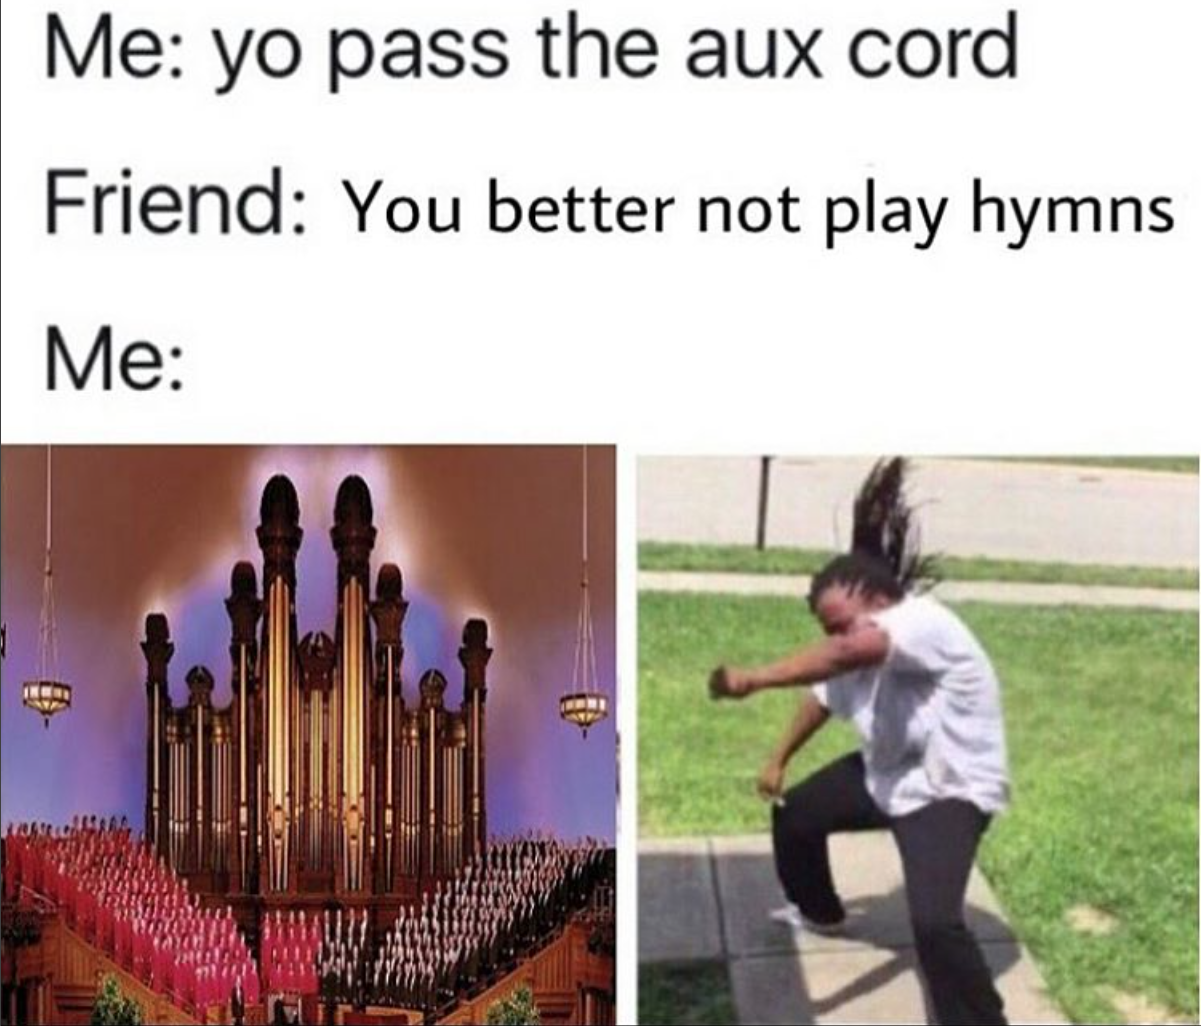 Pass the aux cord for hymns meme